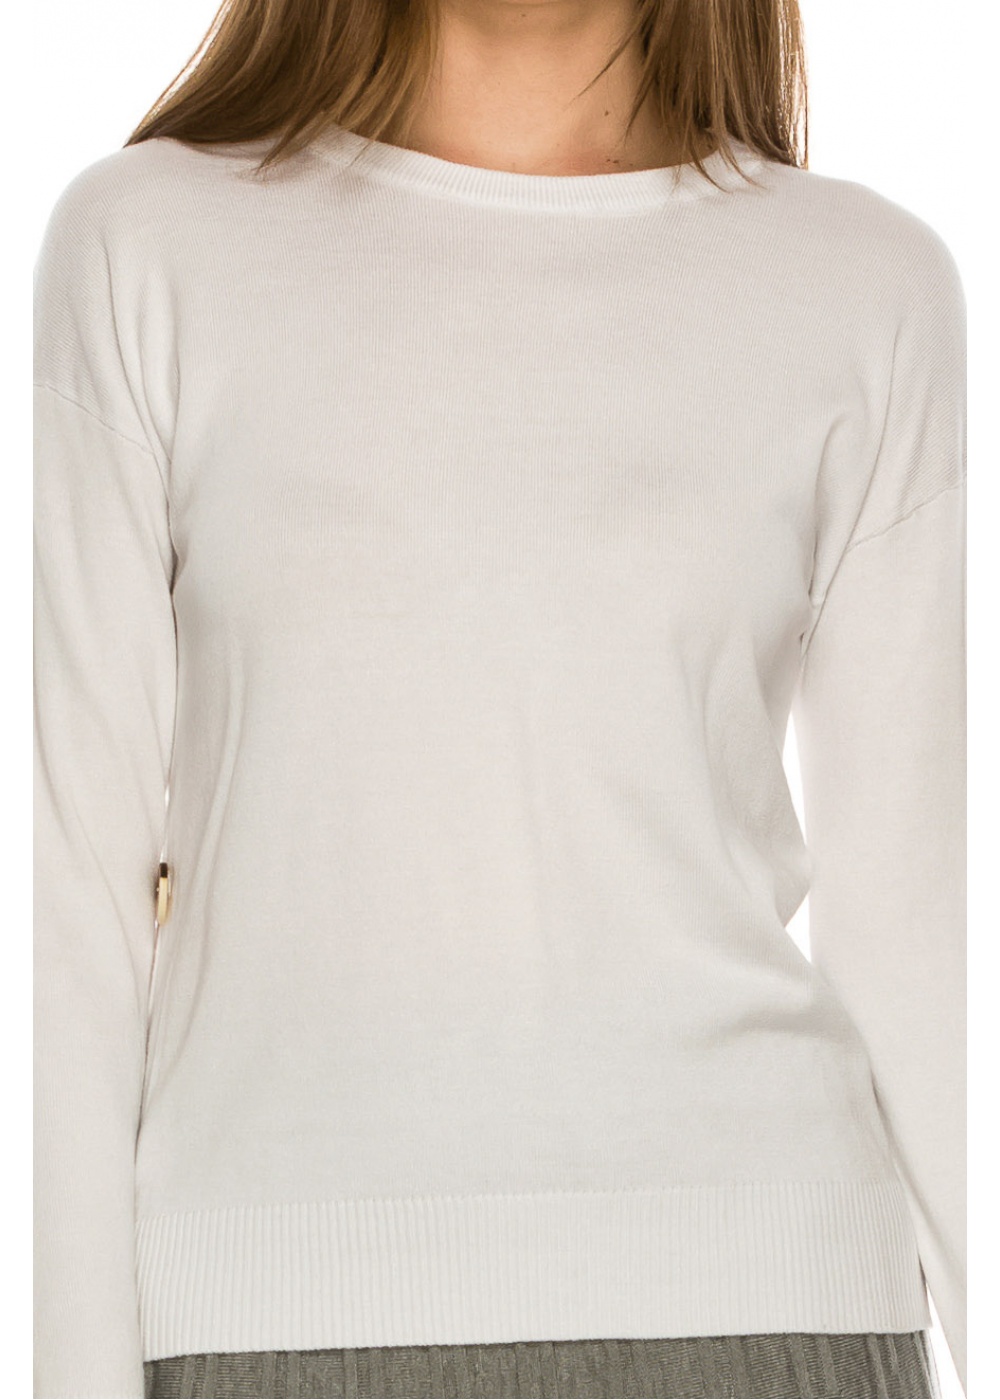 Top with Wooden Button side detailing - White